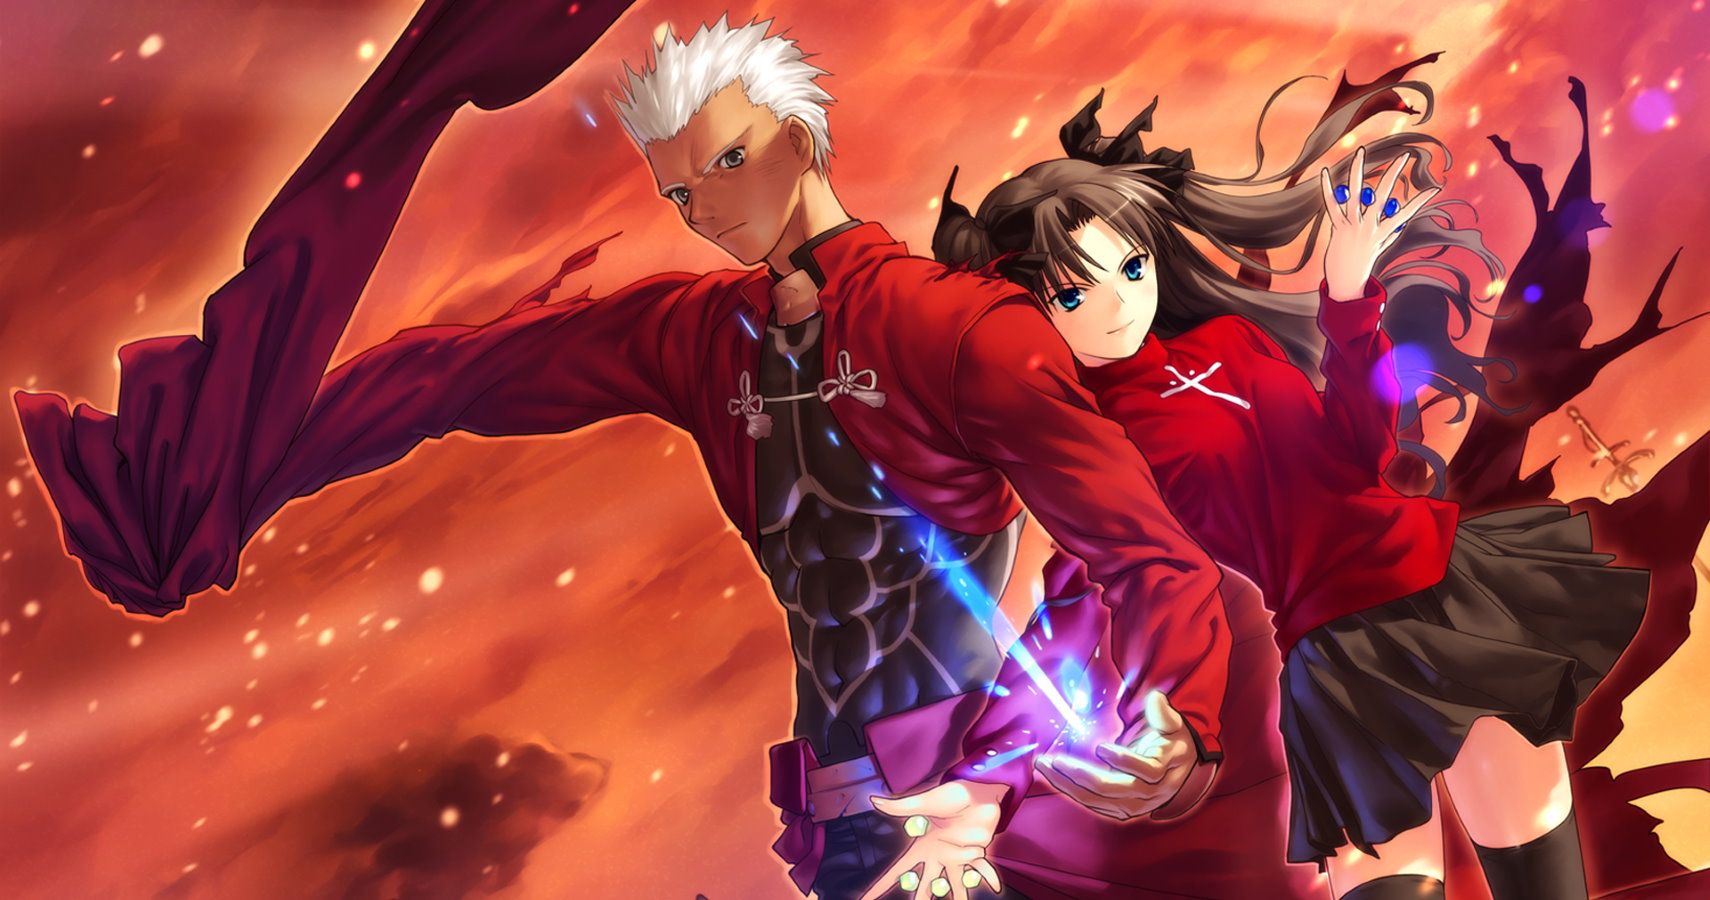 Fate/Stay Night Anime Director Passes Away